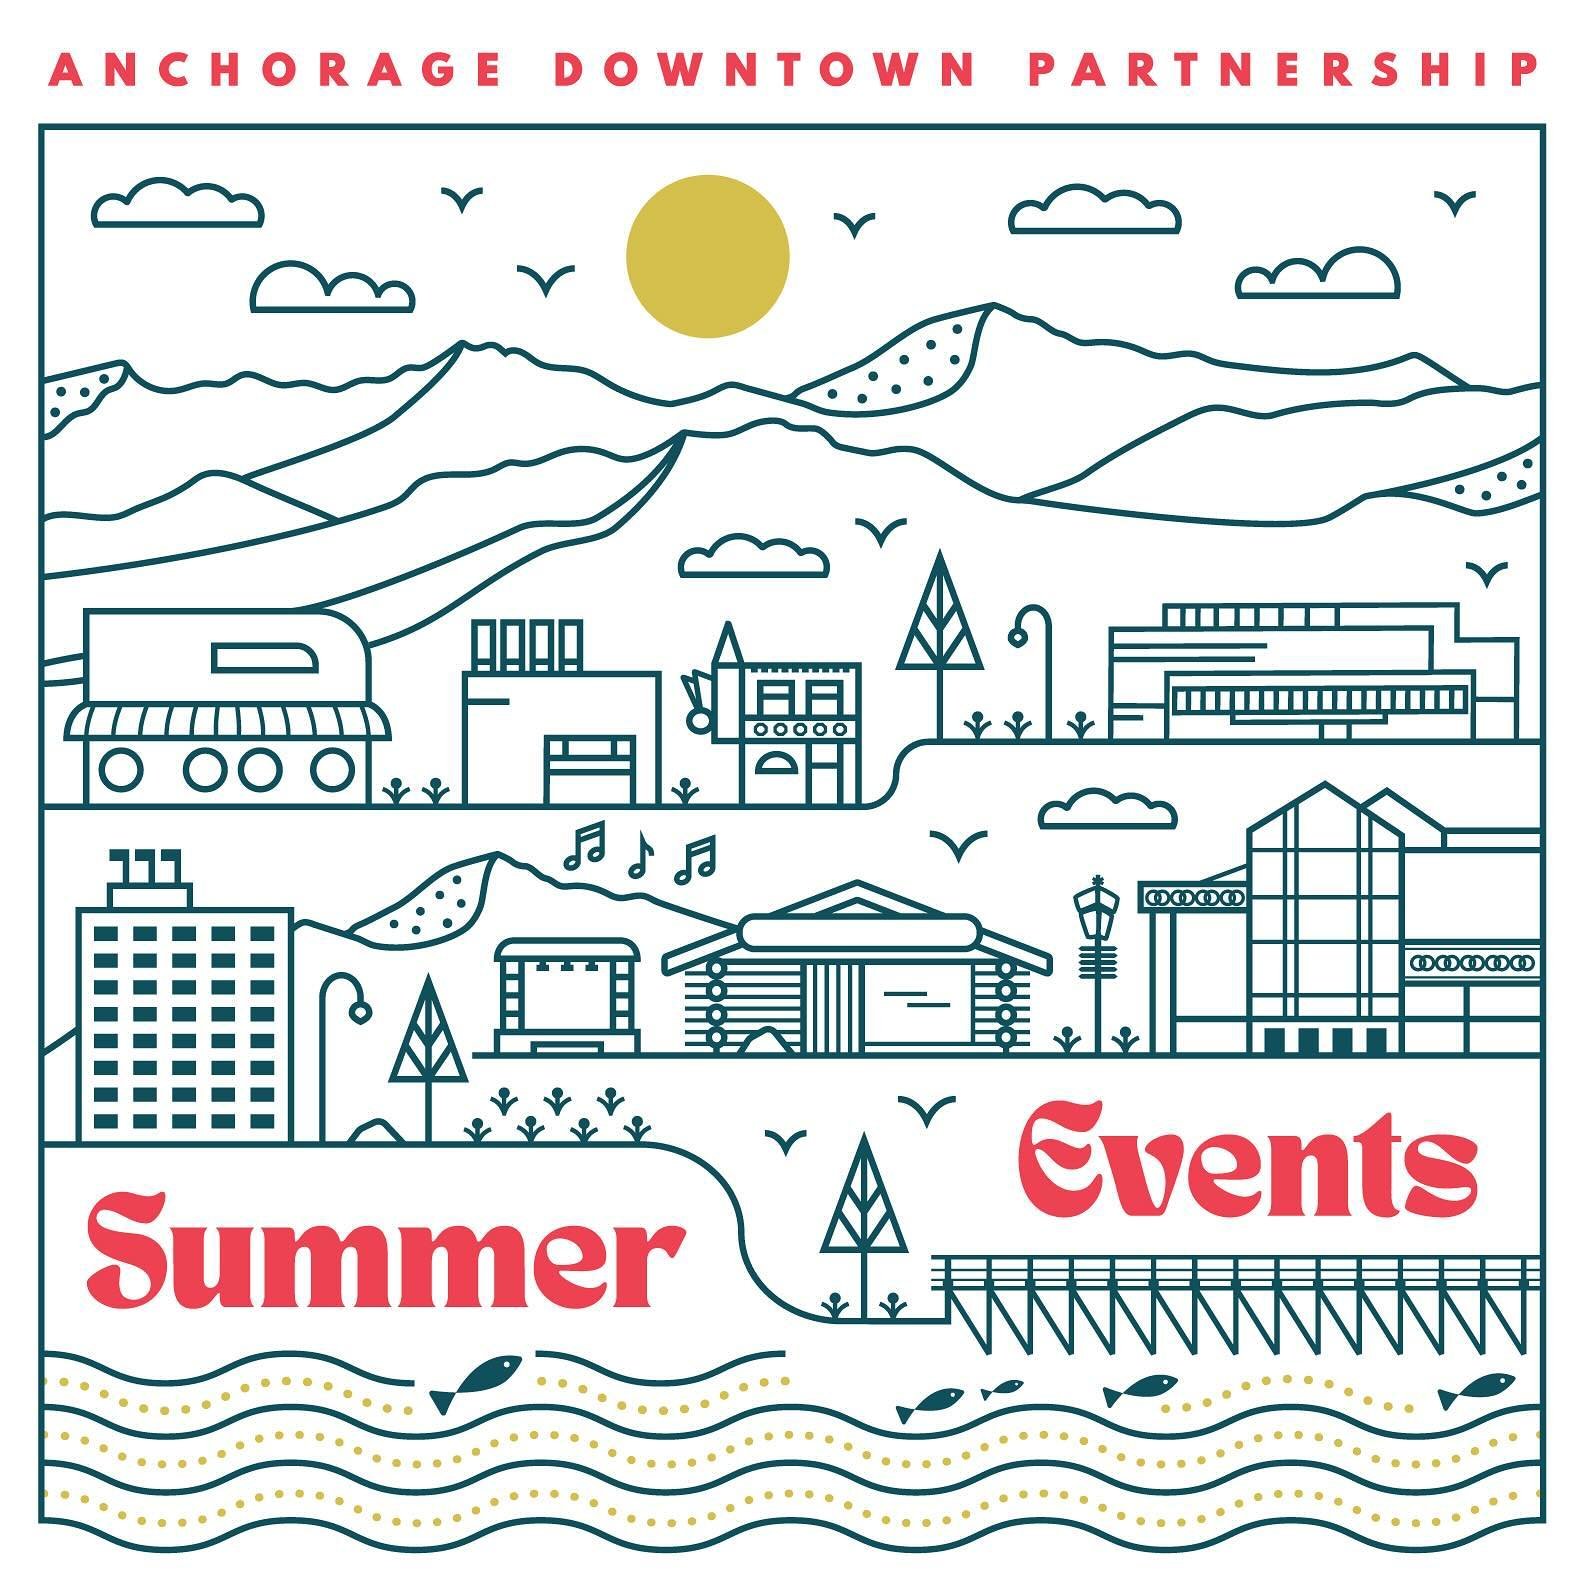 Summer events in @downtownanchorage 🌞 #poeticadesign #anchorage #anchoragelife #downtownanchorage #lineart